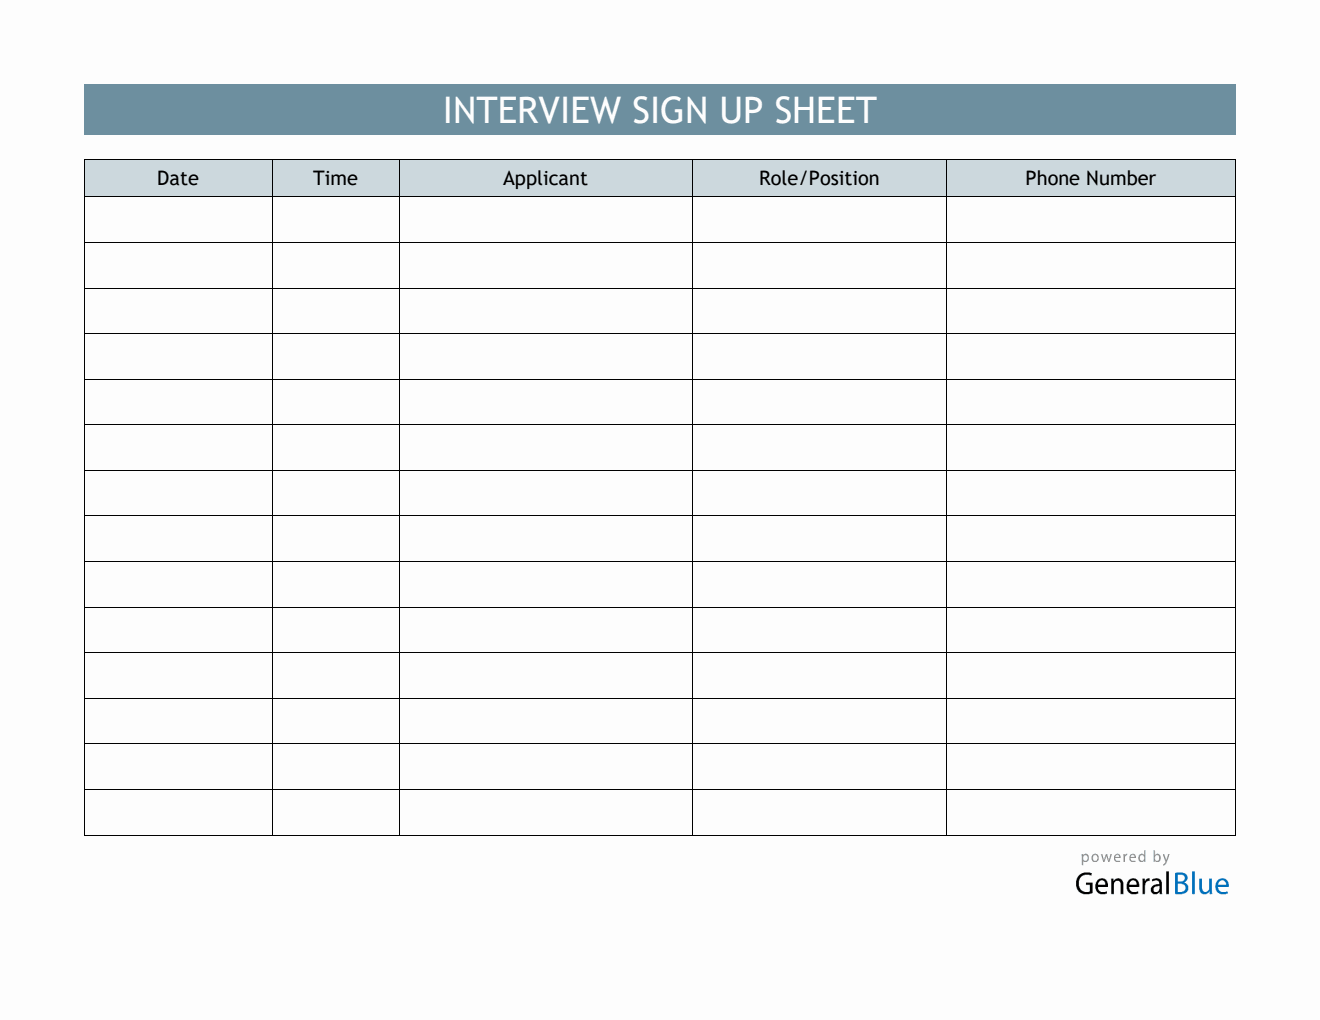 Interview Sign Up Sheet Template in PDF (Colorful)